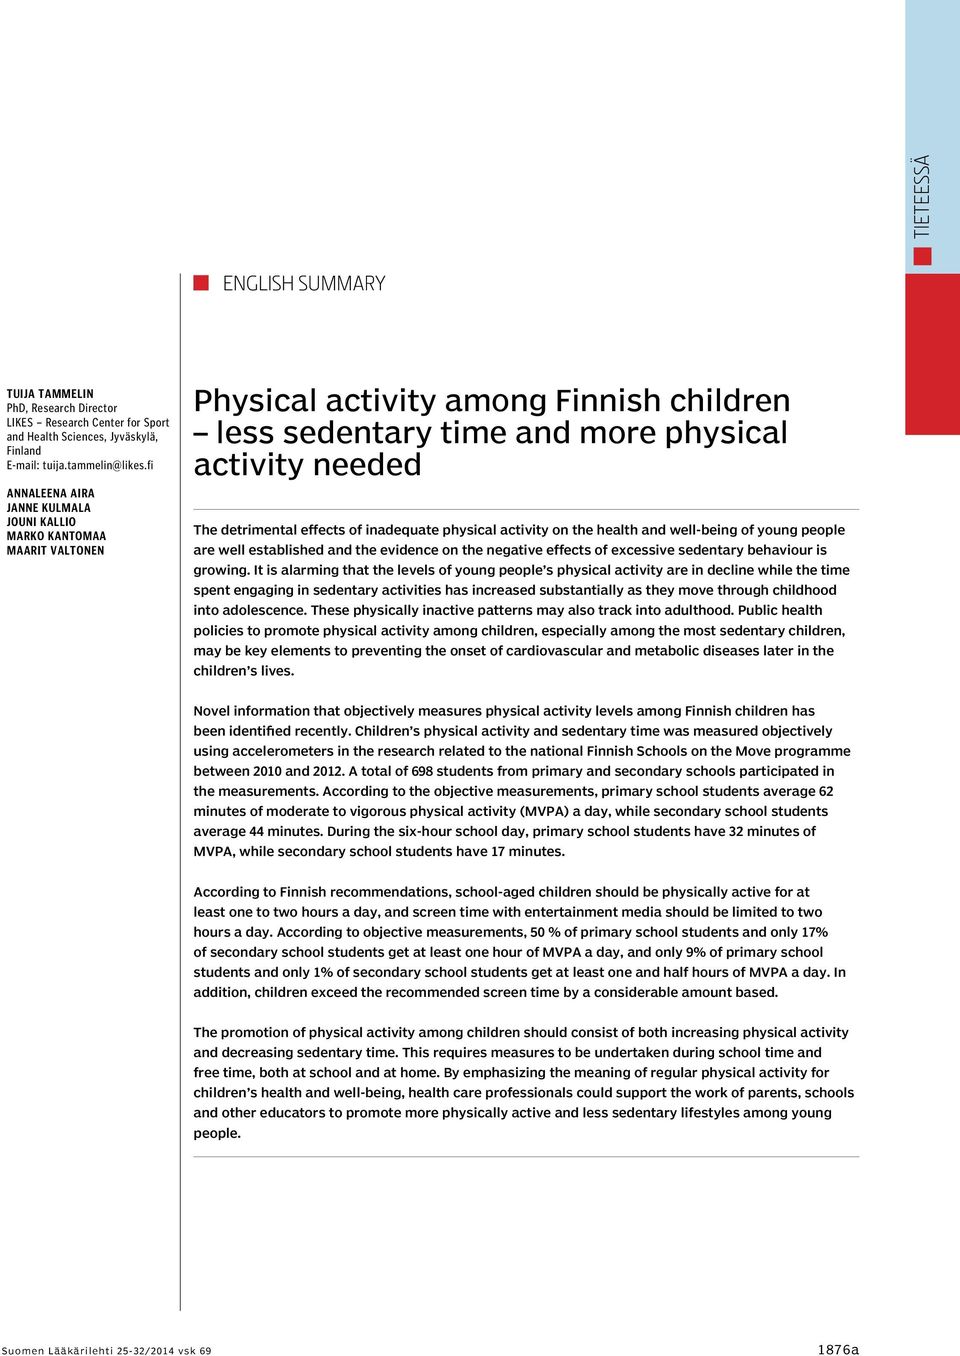 inadequate physical activity on the health and well-being of young people are well established and the evidence on the negative effects of excessive sedentary behaviour is growing.